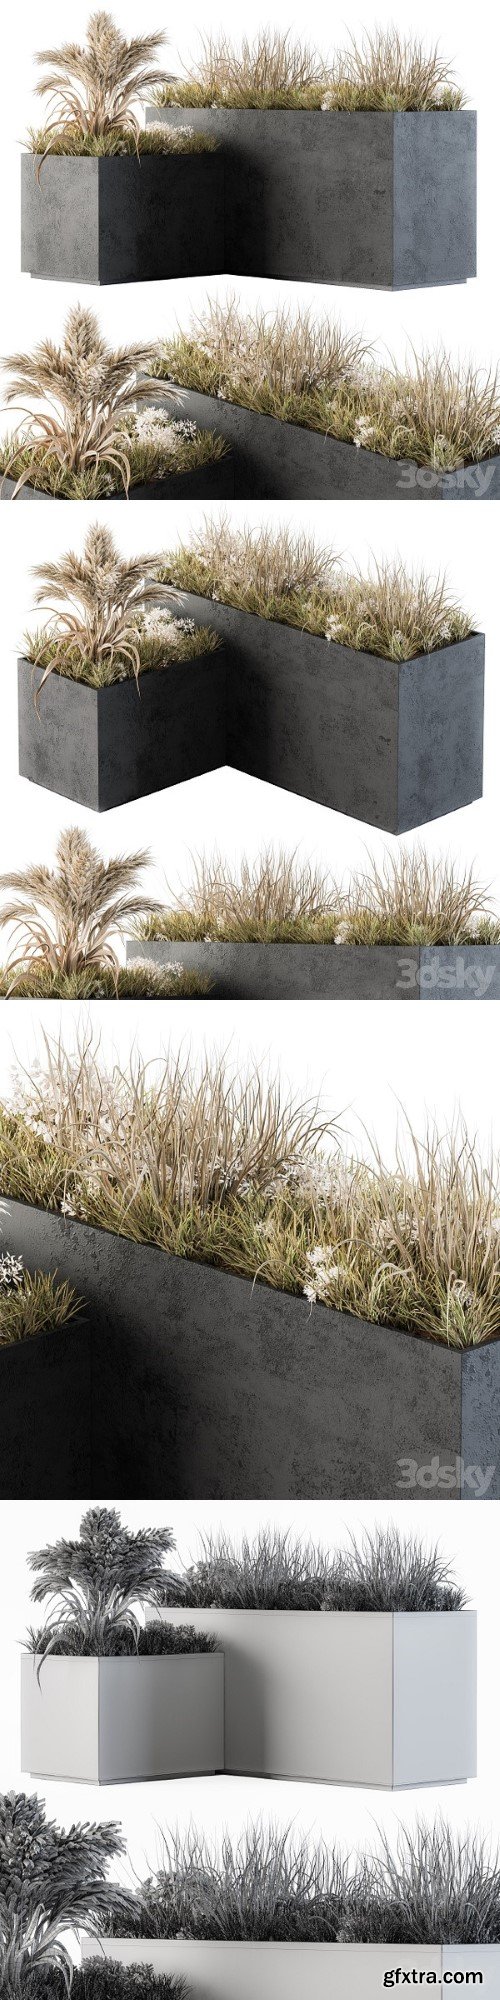 Outdoor Concrete Plant Box With Cereals and Dried Plants | Vray+Corona